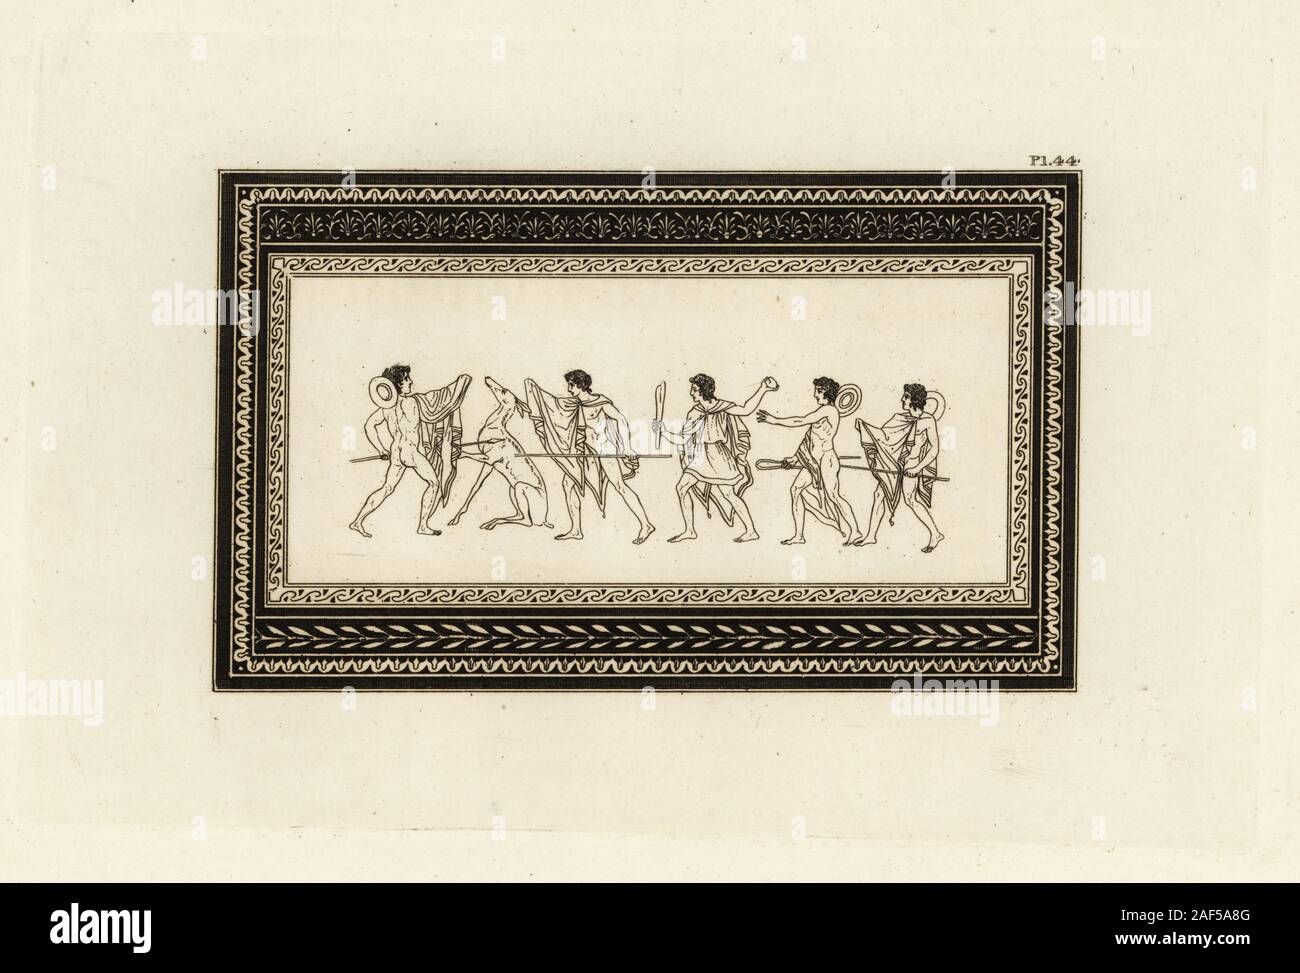 Roman men hunting a deer. Two men lance the deer at left, while others arrive with catapult, stone, crooks. Unknown symbolism. Copperplate engraving by Thomas Kirk (1765-1797)  from Sir William Hamilton’s Outlines from the Figures and Compositions upon the Greek, Roman and Etruscan Vases of the Late Sir Hamilton, T. M’Lean, London, 1834. Stock Photo